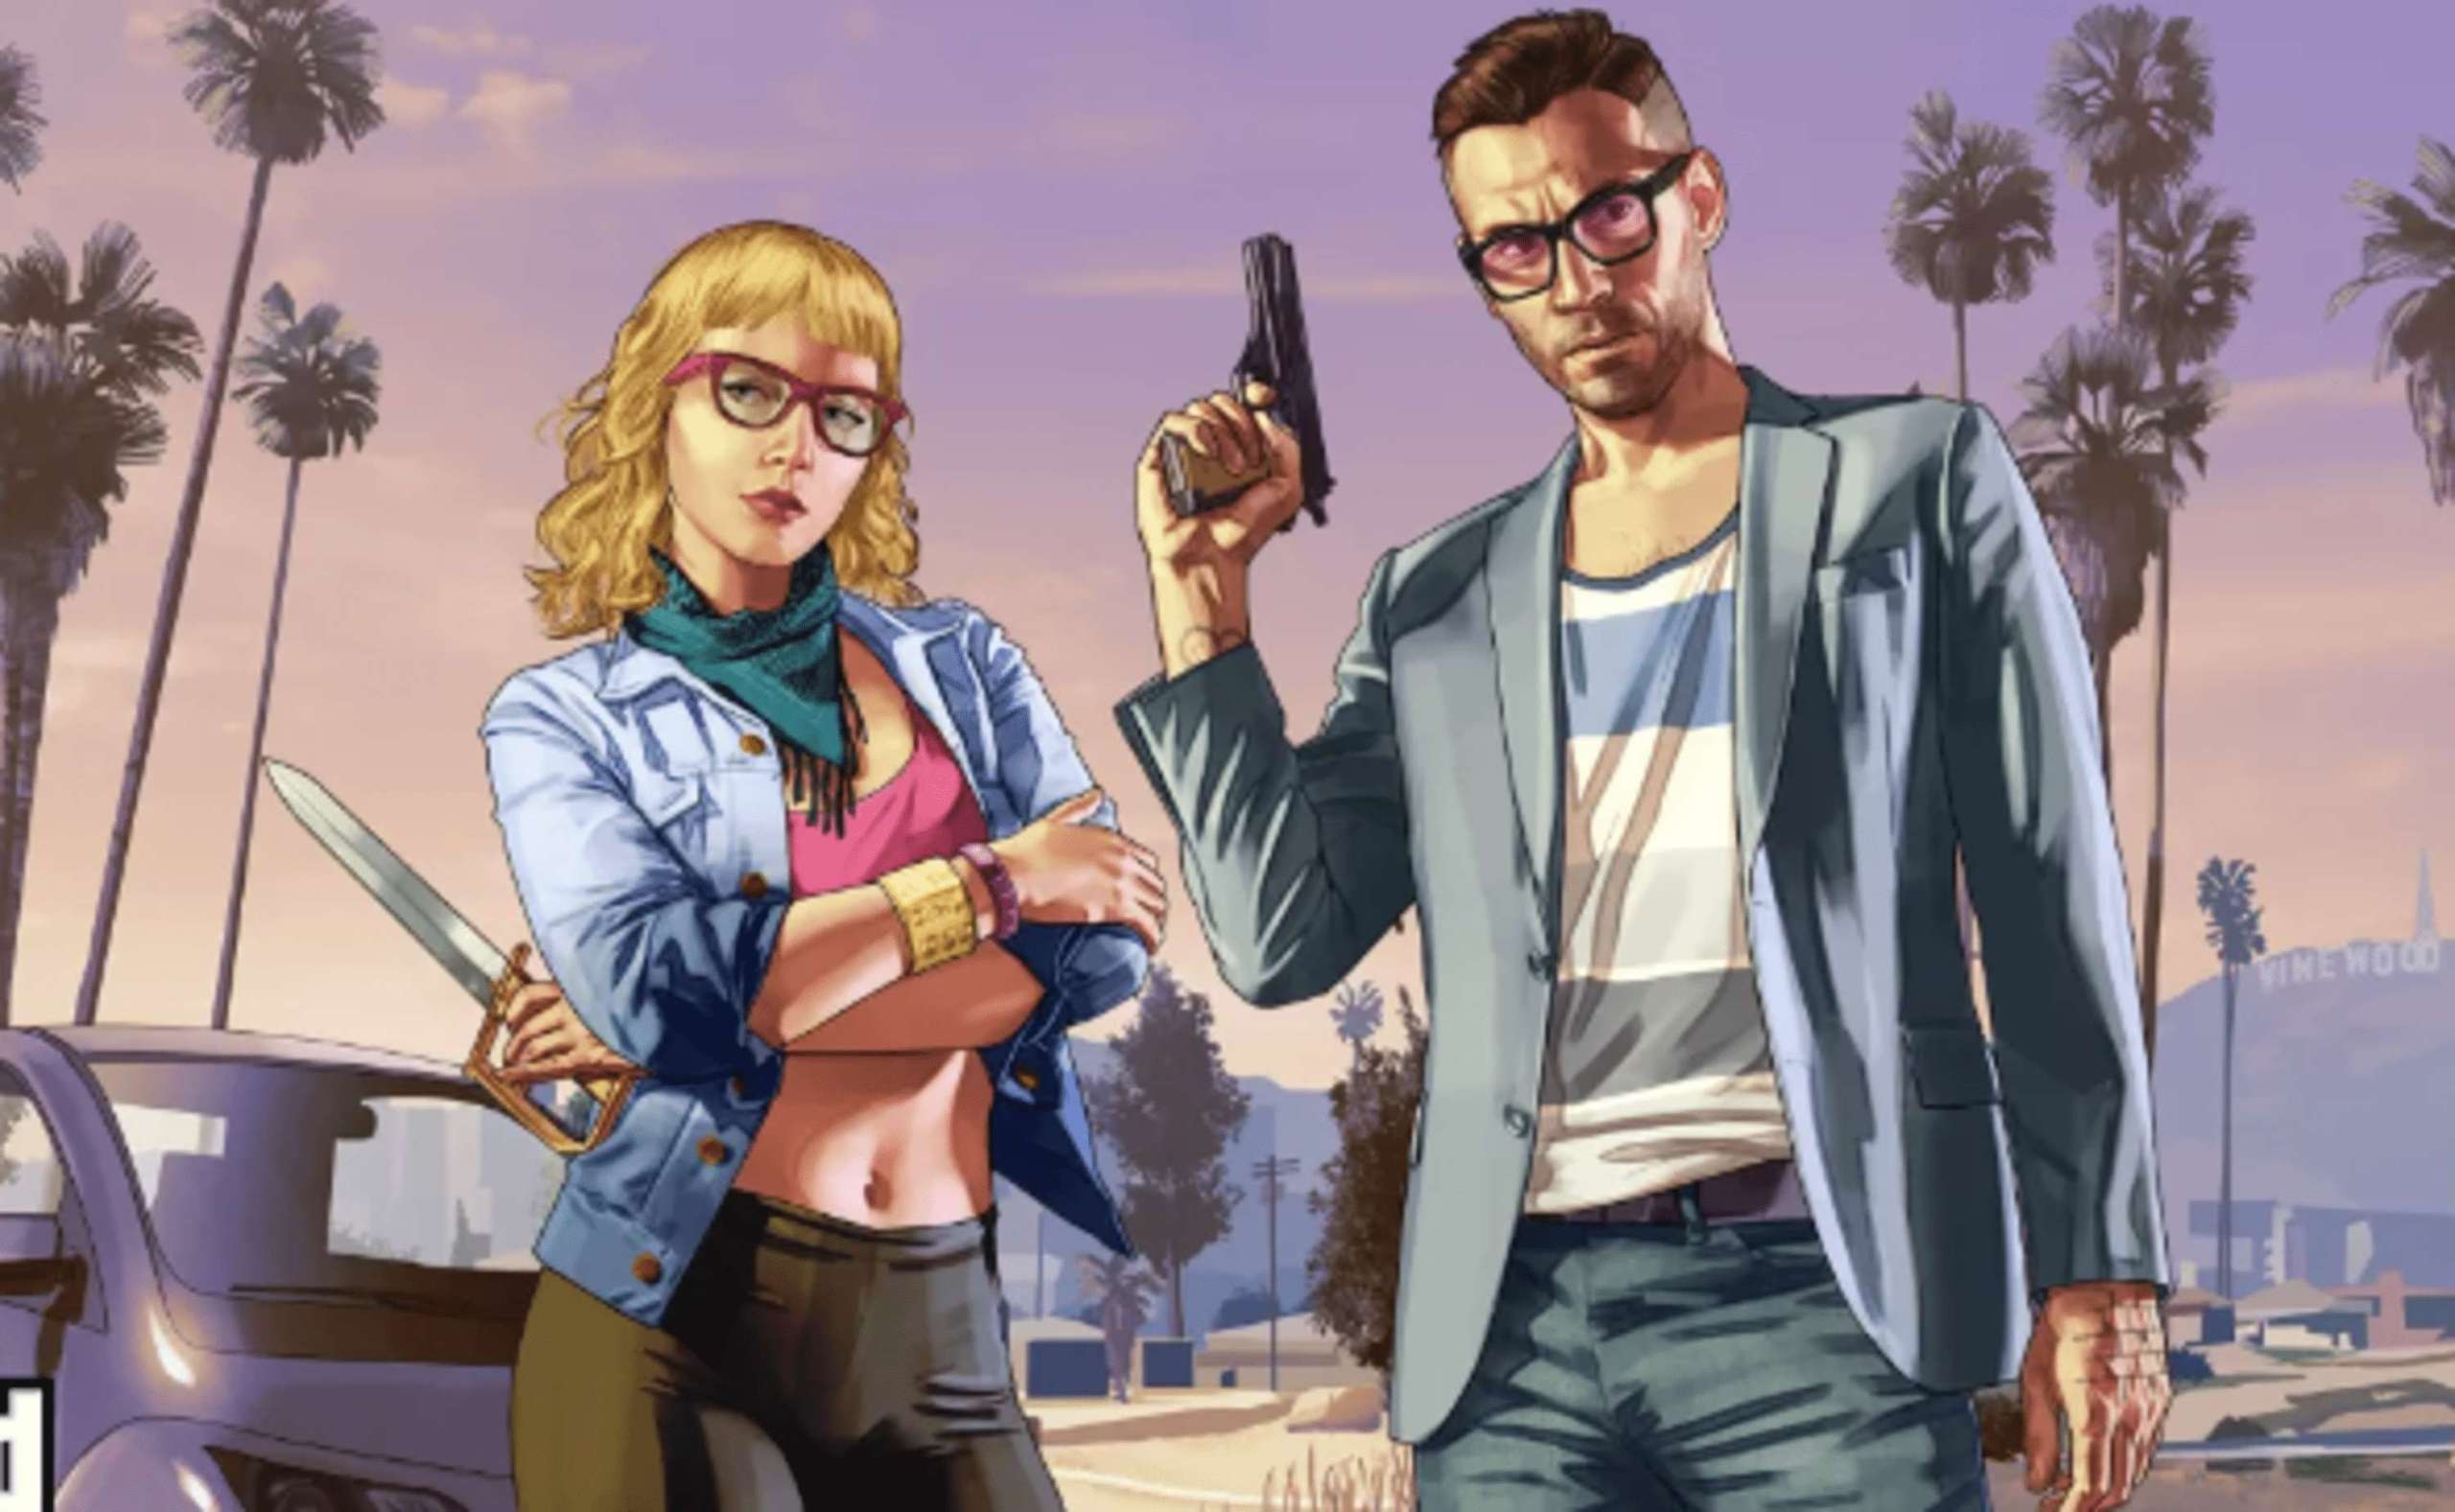 According To Reports, The Leak Of Grand Theft Auto 6 Has Devastated The Developers At Rockstar